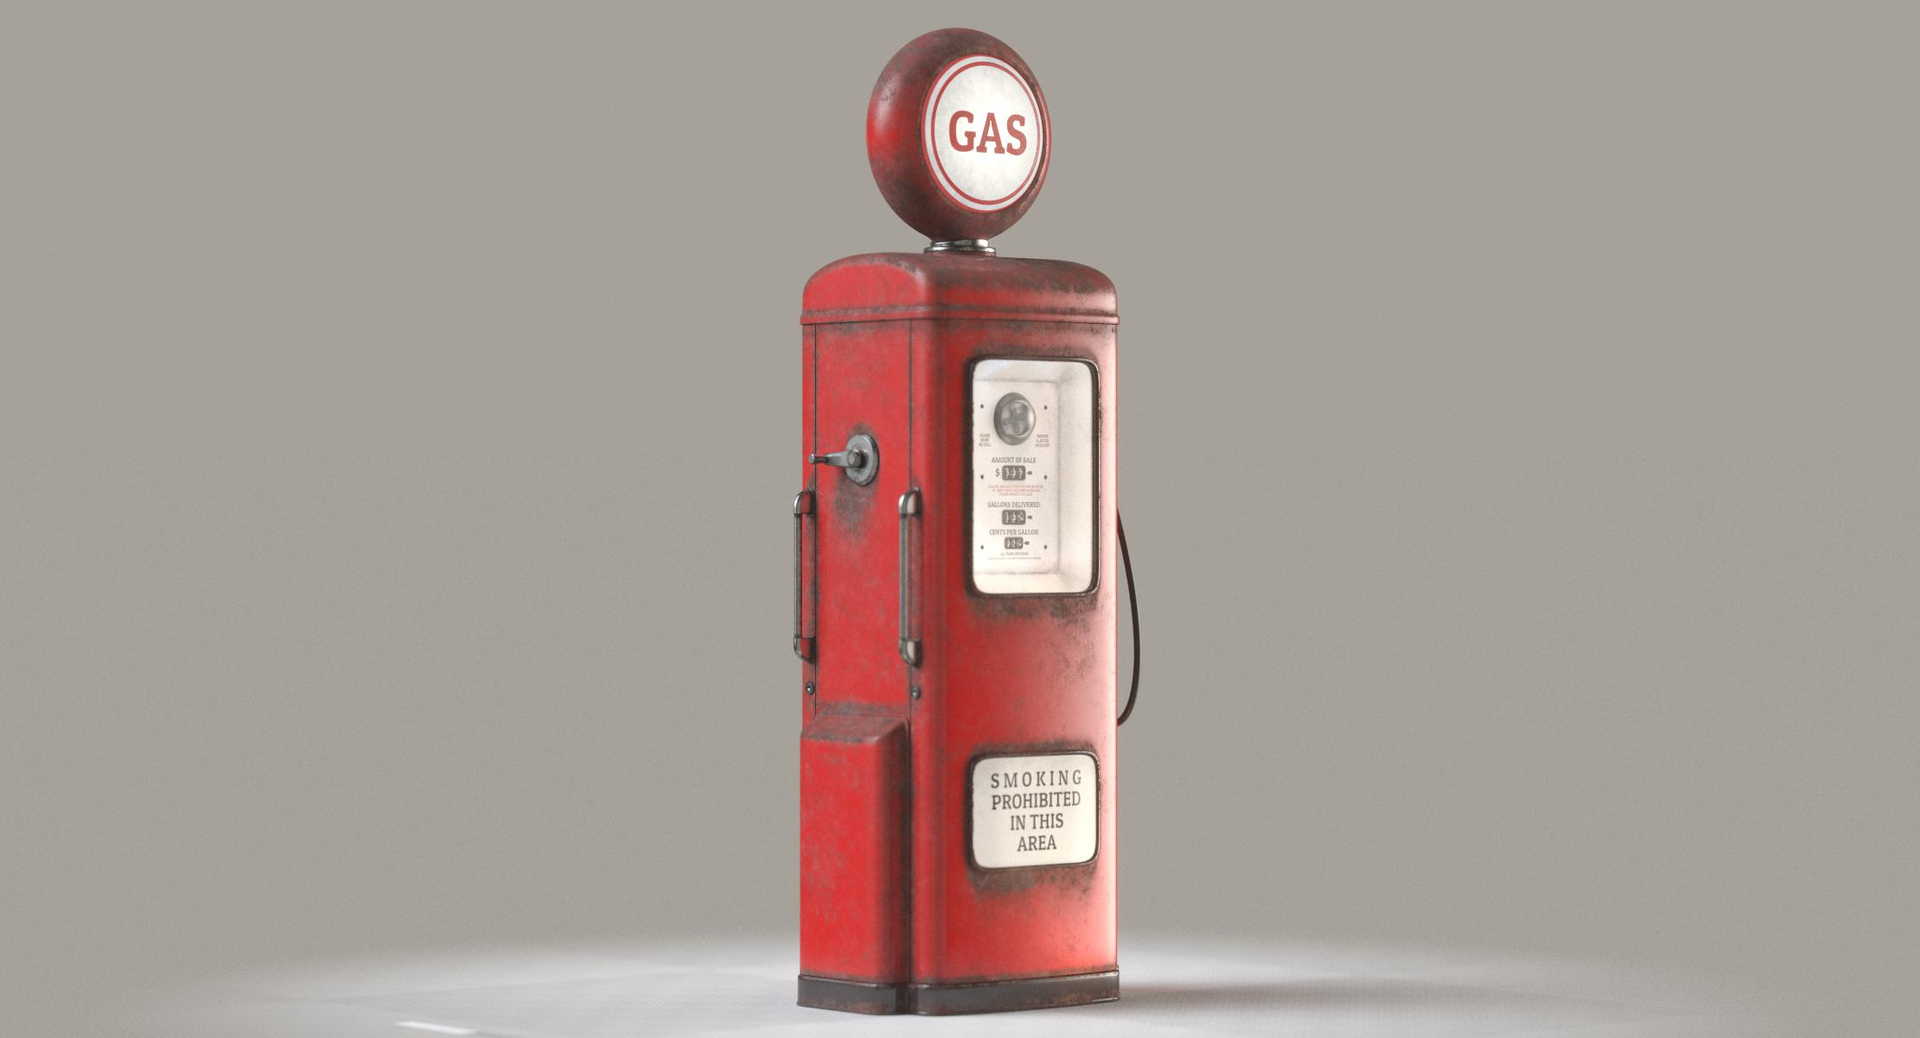 Standalone Vintage Gas Pump with Movements 3D